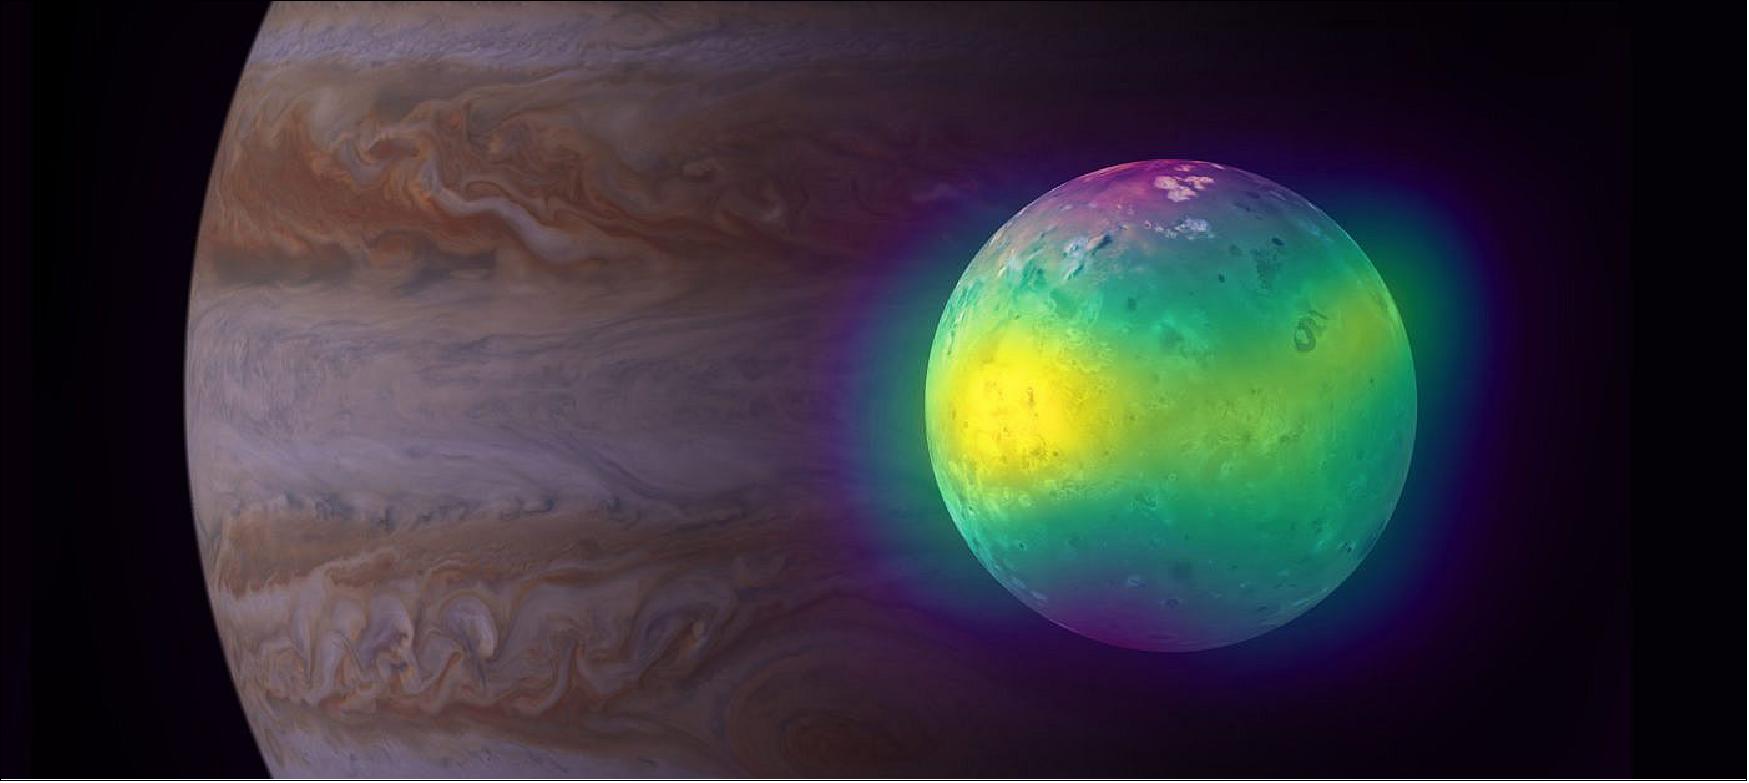 Figure 48: Composite image showing Jupiter’s moon Io in radio (ALMA), and optical light (Voyager 1 and Galileo). The ALMA images of Io show for the first time plumes of sulfur dioxide (in yellow) rise up from its volcanoes. Jupiter is visible in the background (Hubble), image credit: ALMA (ESO/NAOJ/NRAO), I. de Pater et al.; NRAO/AUI NSF, S. Dagnello; NASA/ESA